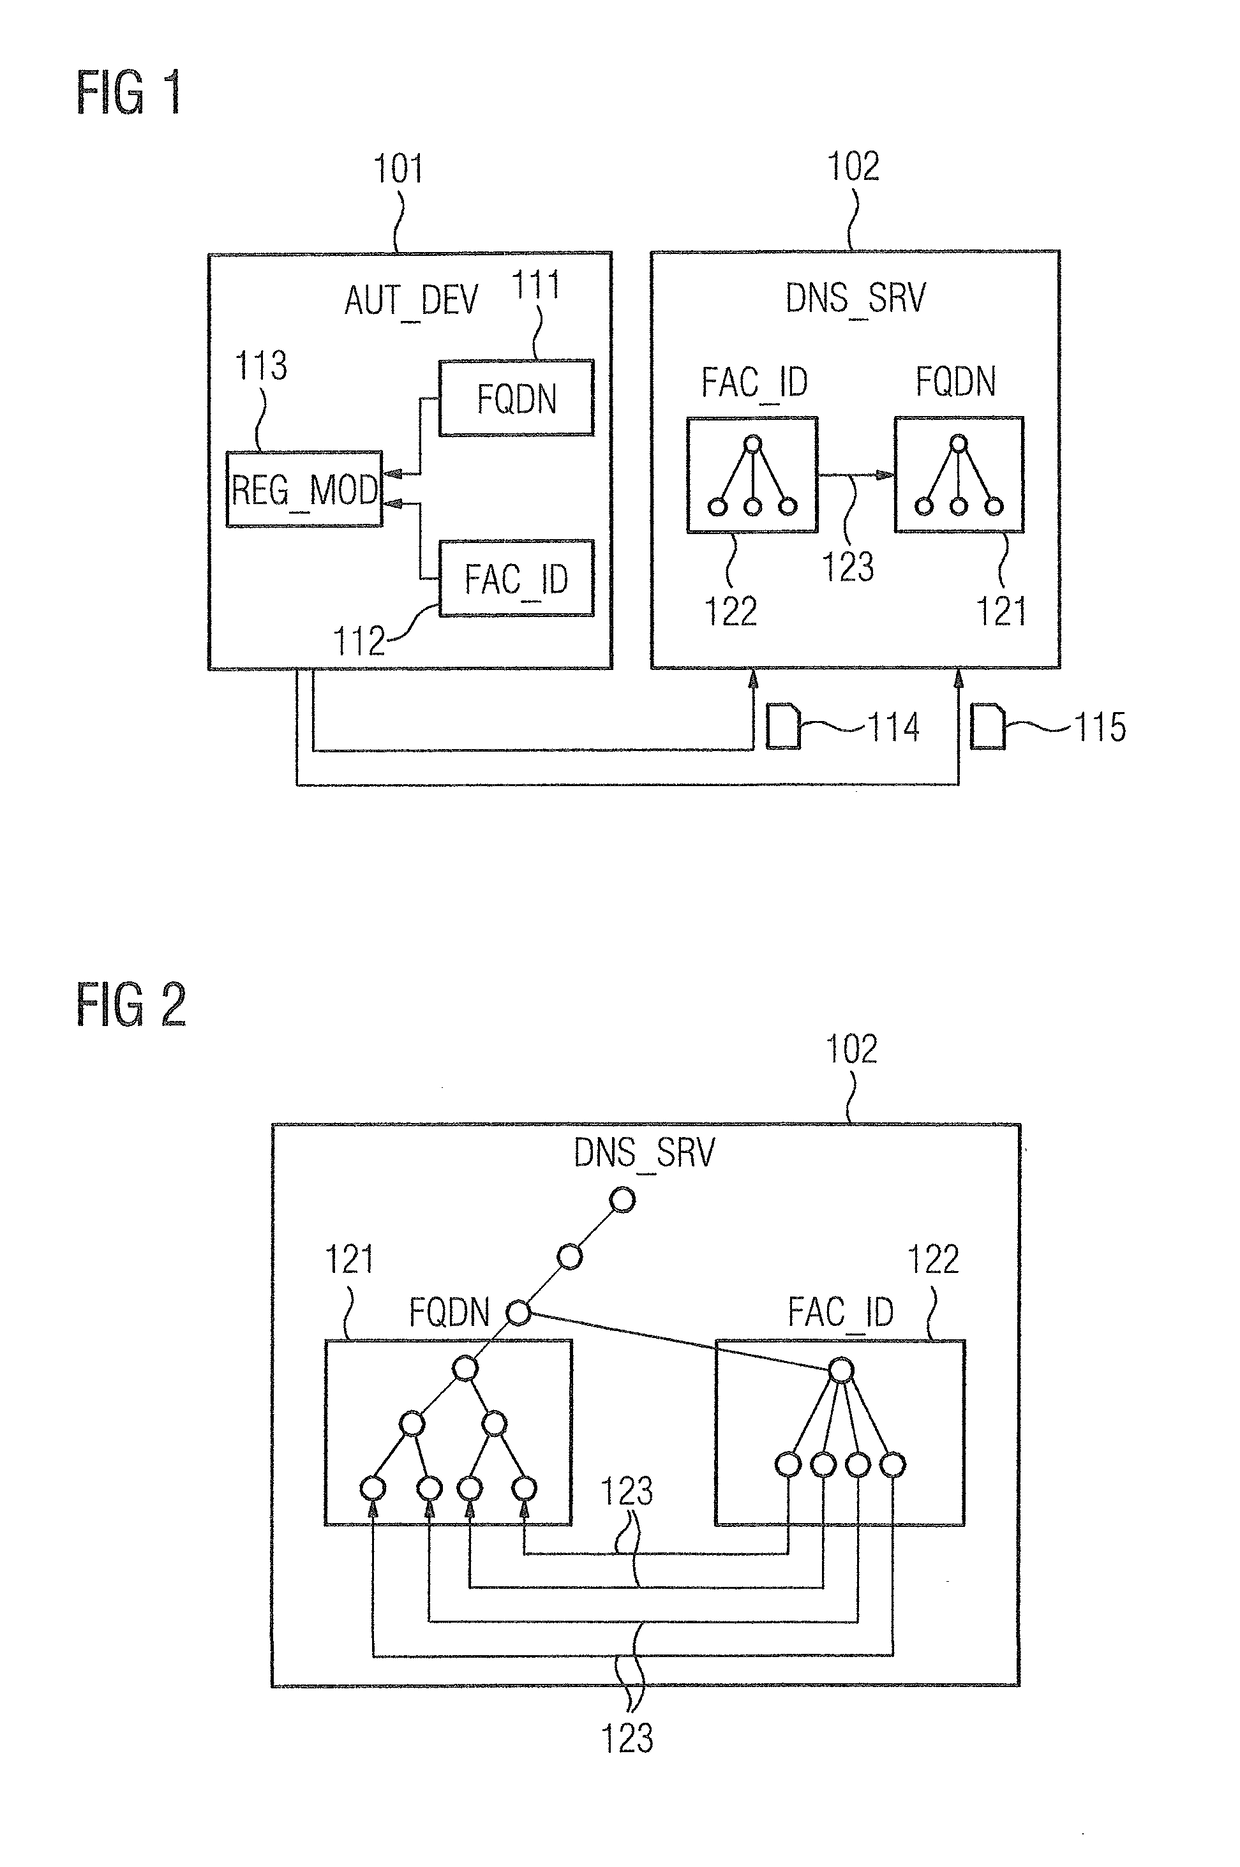 Method for Providing an Expanded Name Service for an Industrial Automation System